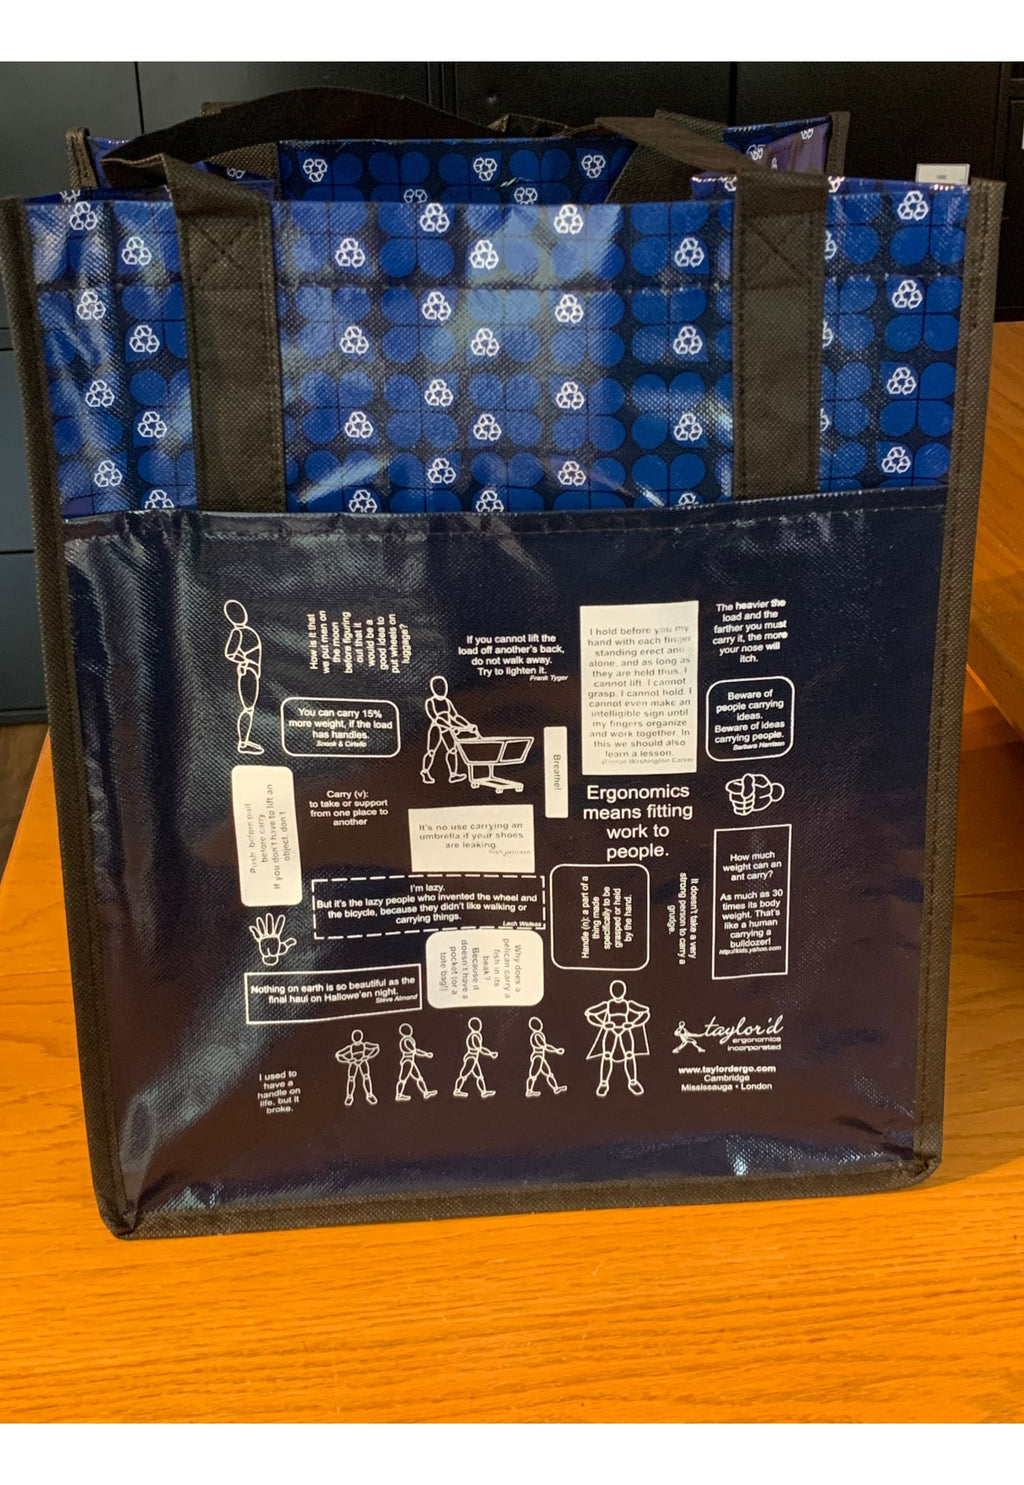 grocery tote with ergonomics message